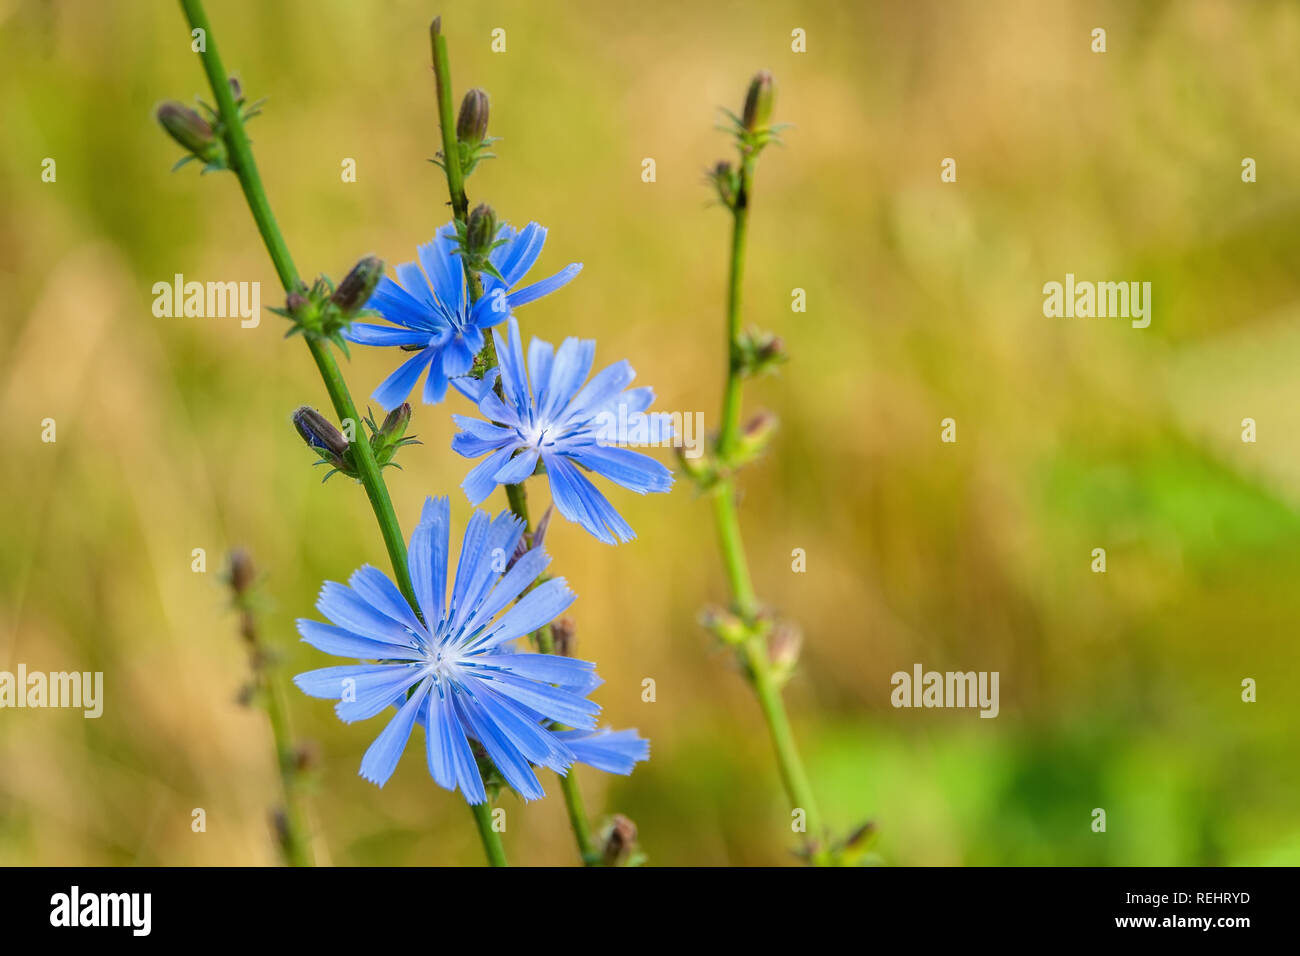 Common flowers of chicory or Cichorium intybus, commonly called blue sailors, chicory, coffee grass or Sukori, is a grassy perennial plant. Coffee sub Stock Photo